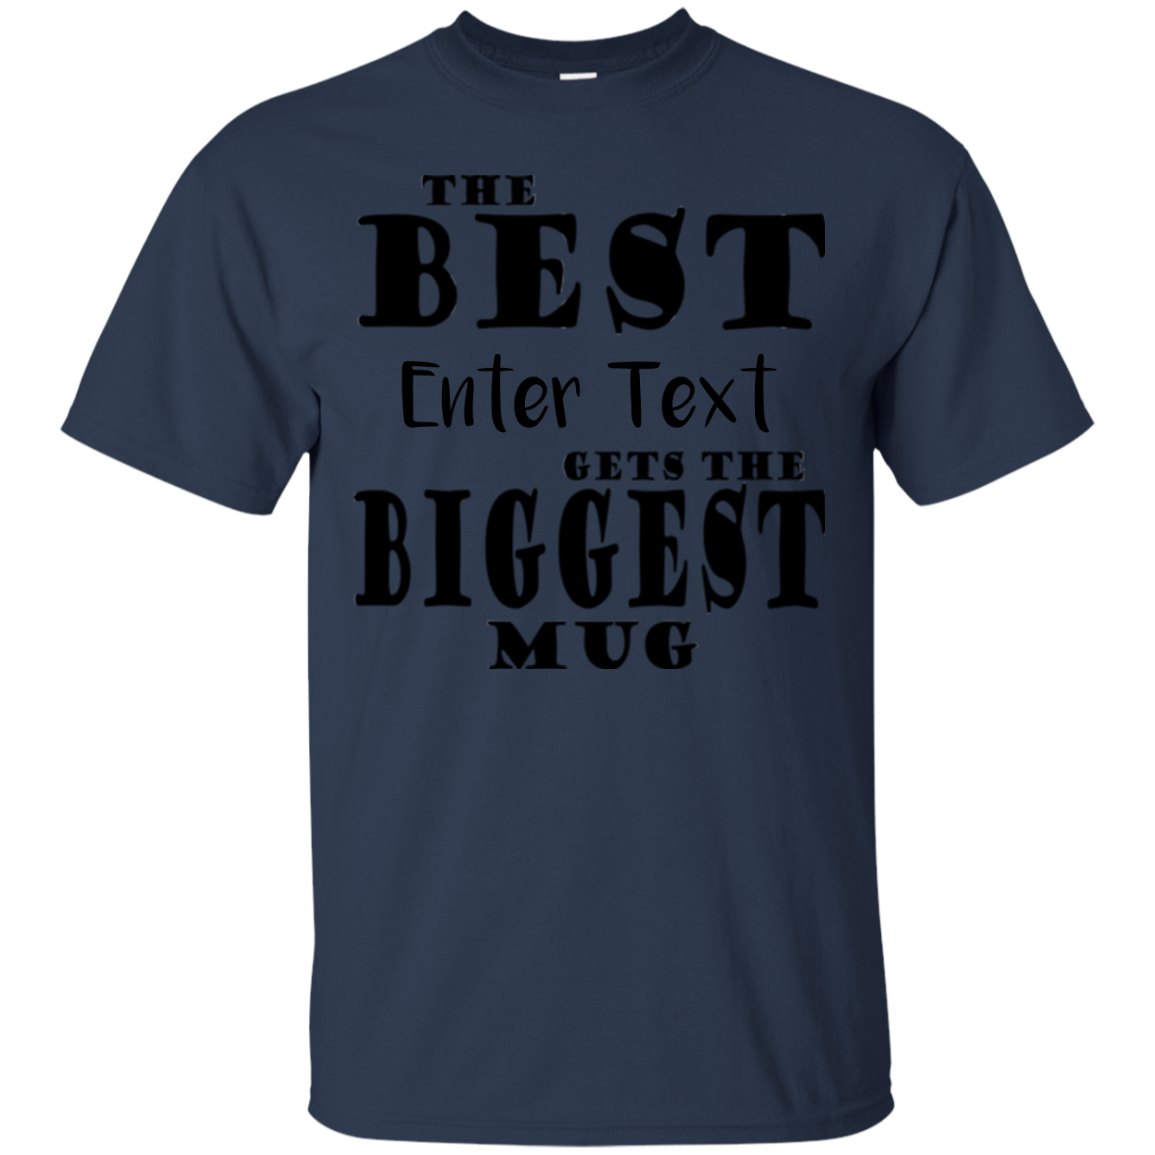 Personalized - The Best Occupation T-Shirt